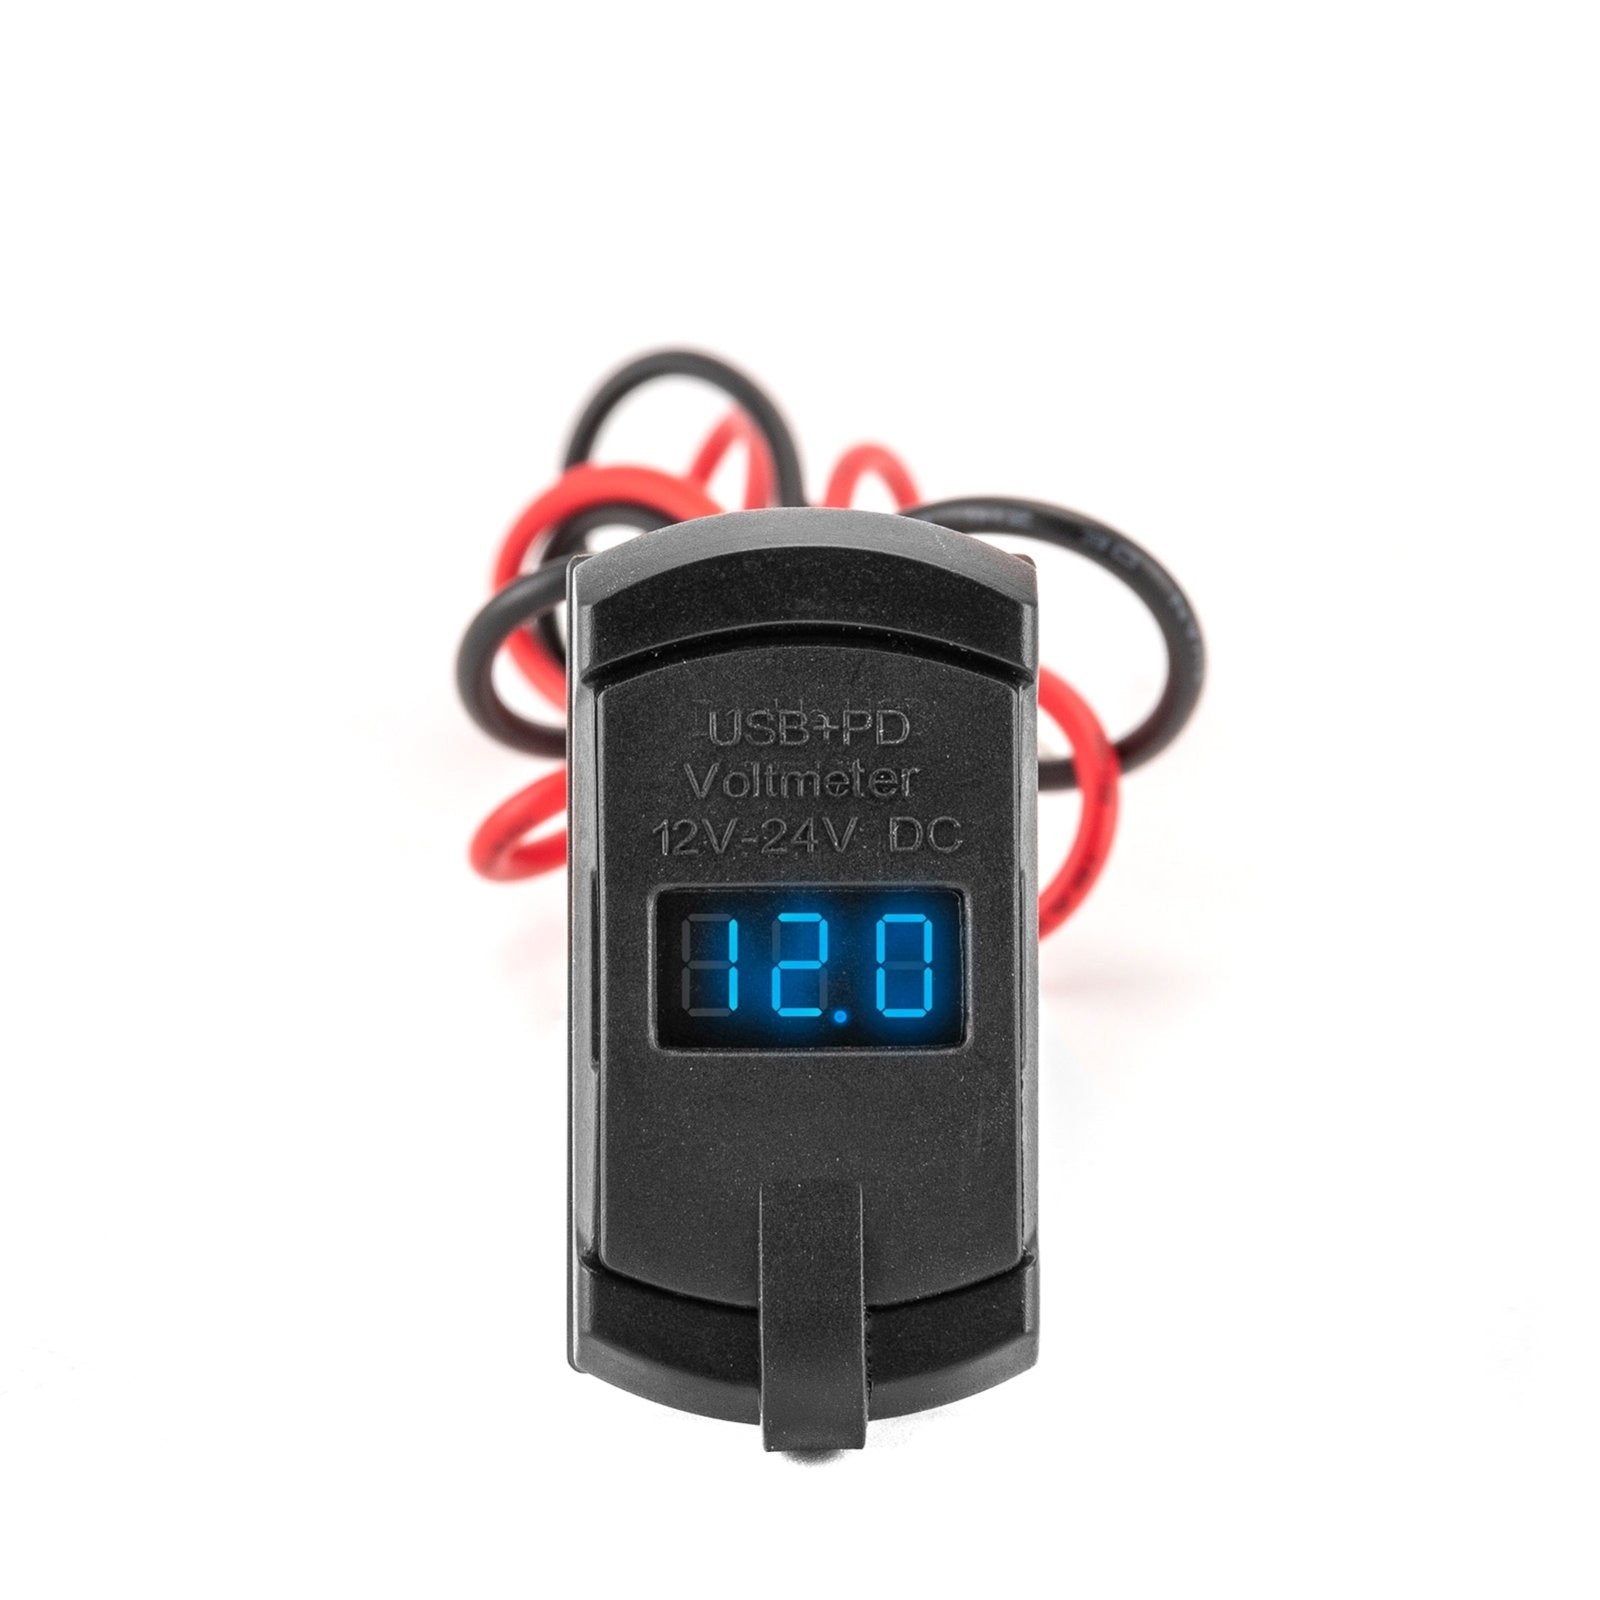 UTVs ATVs SUVs Trucks Boats USB Rocker Switch 12v Dual Charger/Outlet with LED Voltmeter Display - Weisen